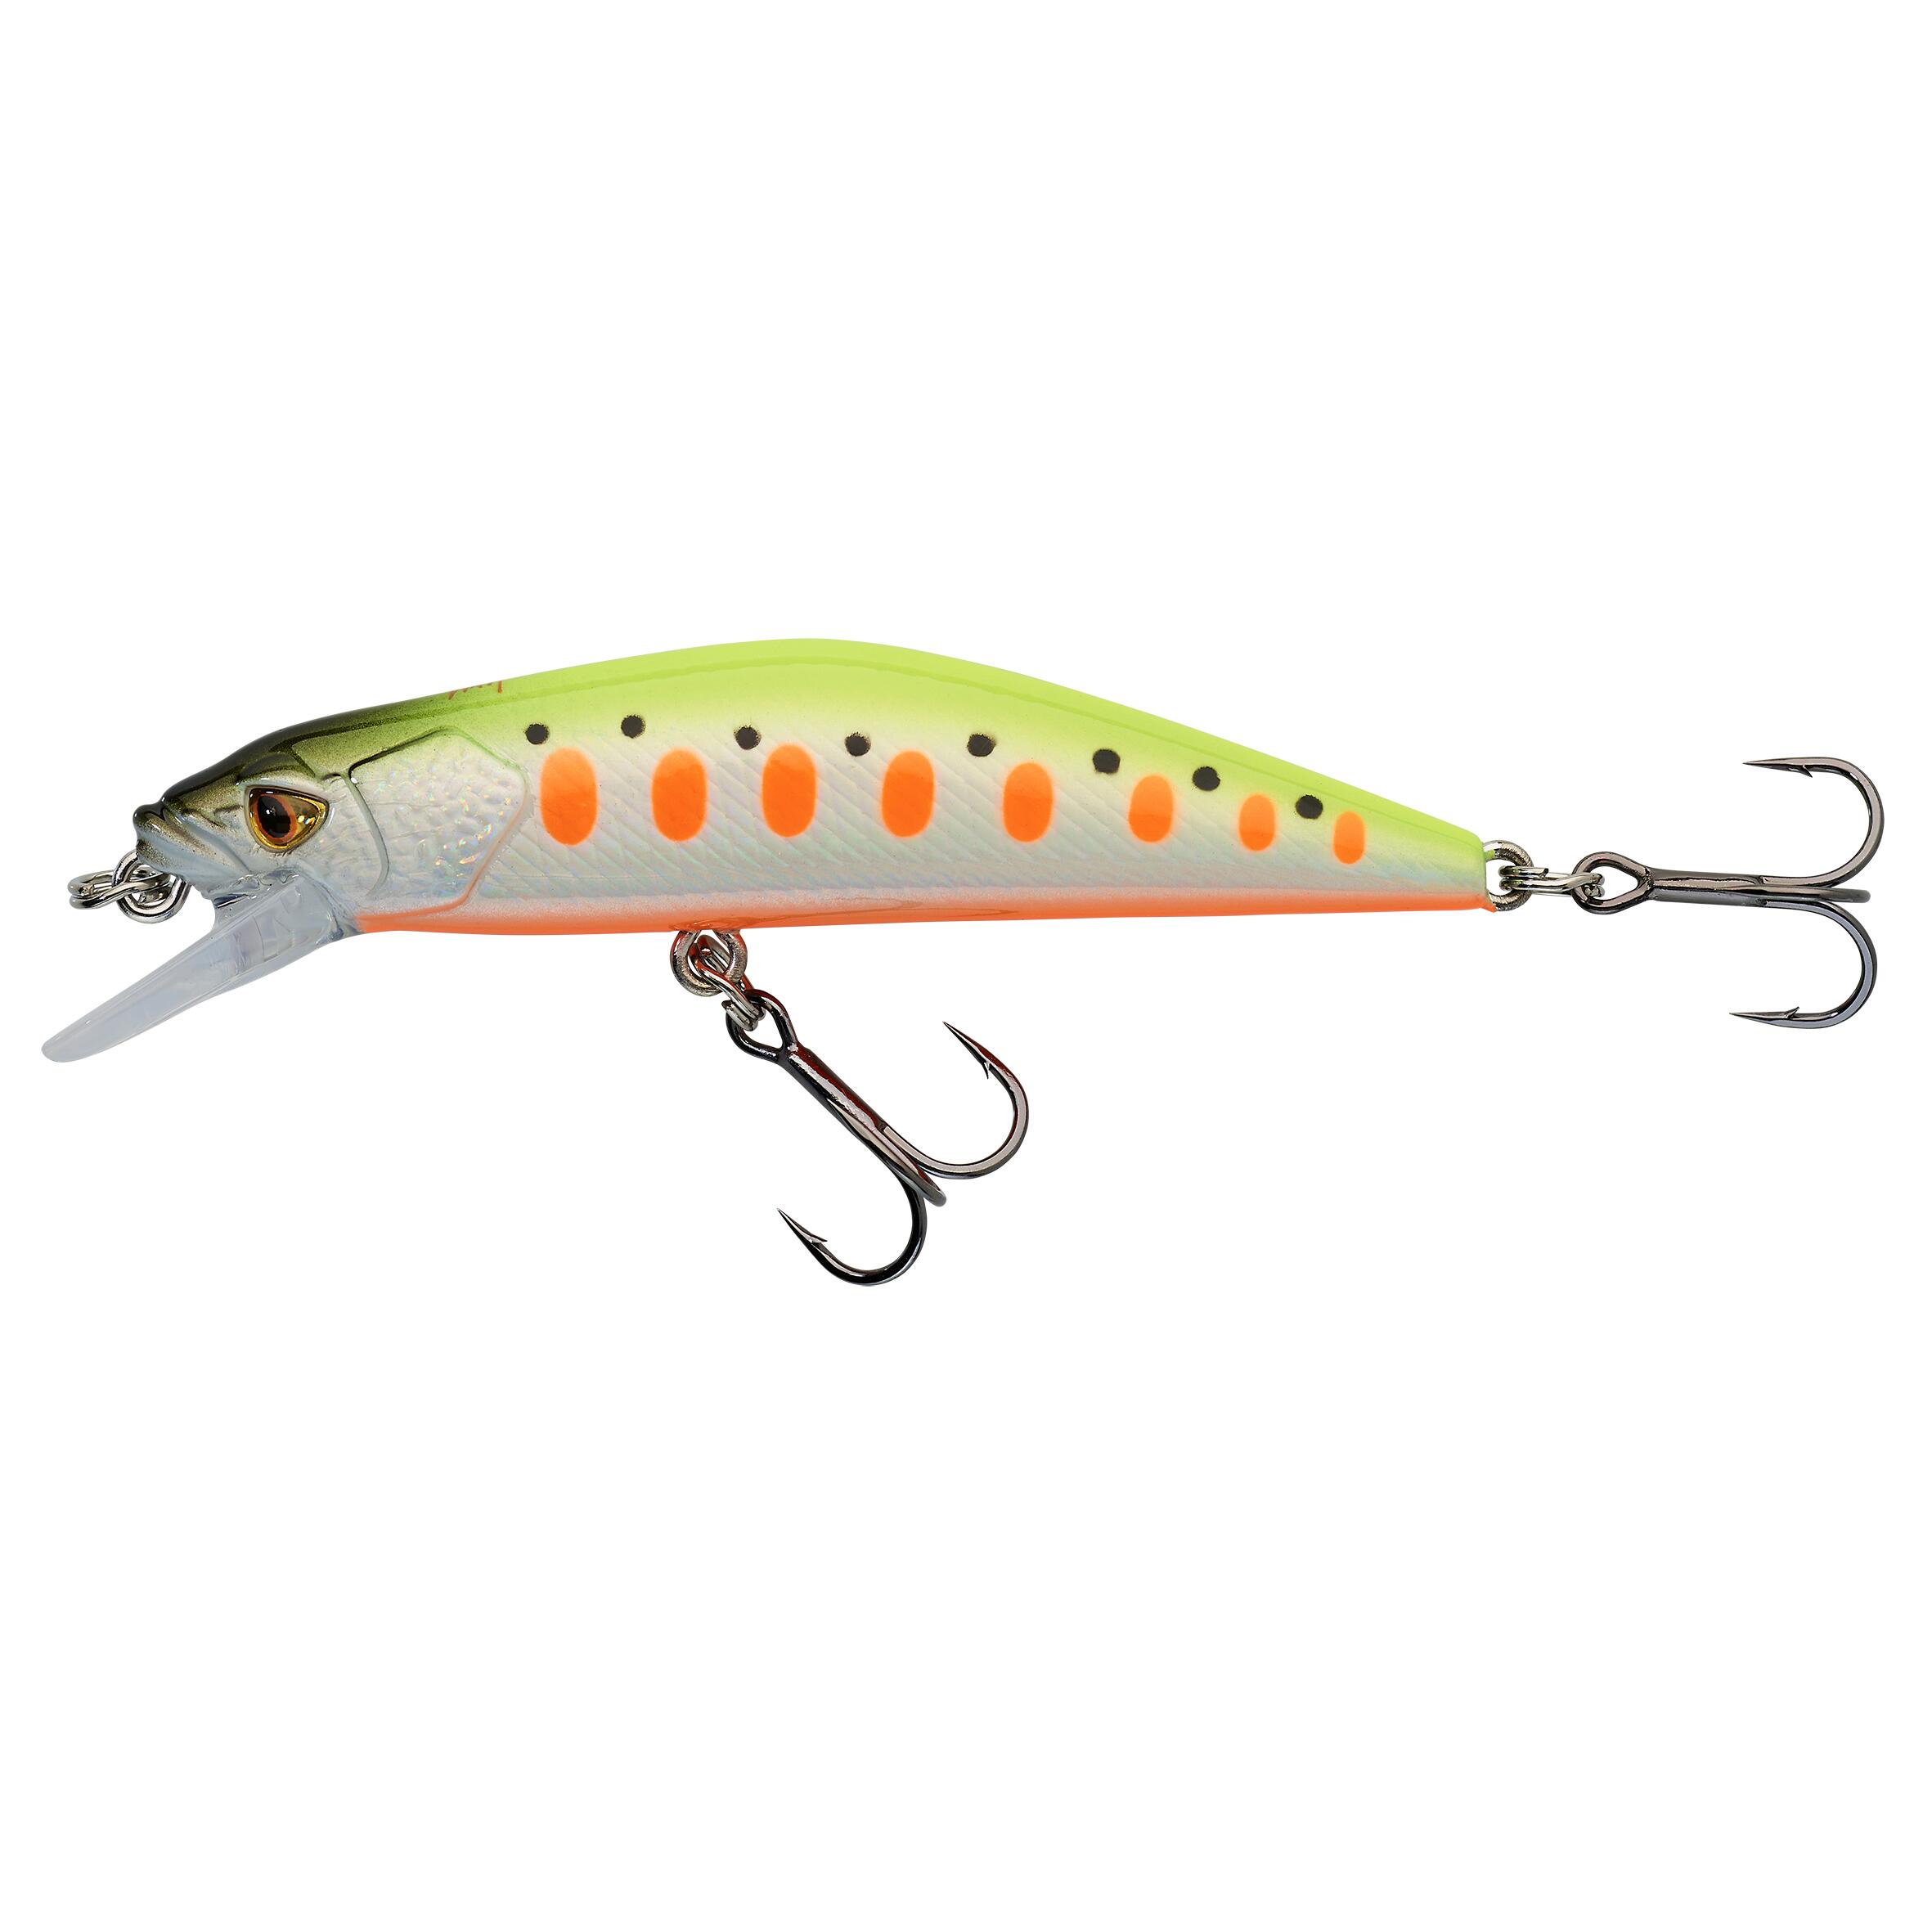 MINNOW HARD LURE FOR TROUT WXM MNWFS 70 US NEON YELLOW 1/4